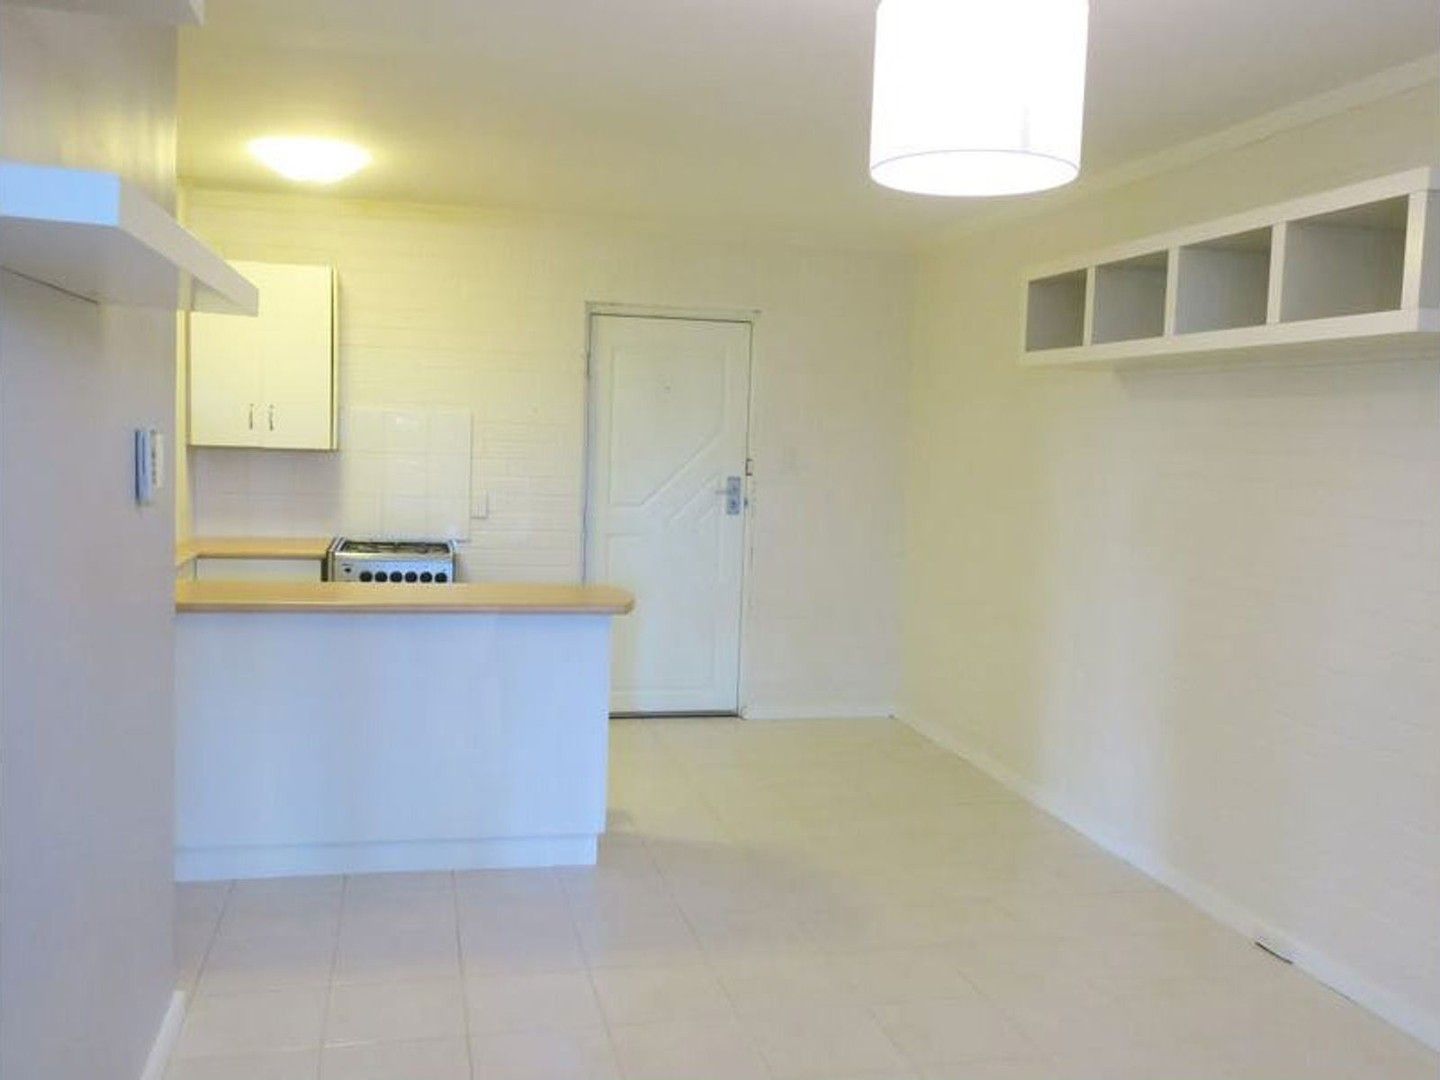 2 bedrooms Apartment / Unit / Flat in 5/226 Whatley Crescent MAYLANDS WA, 6051